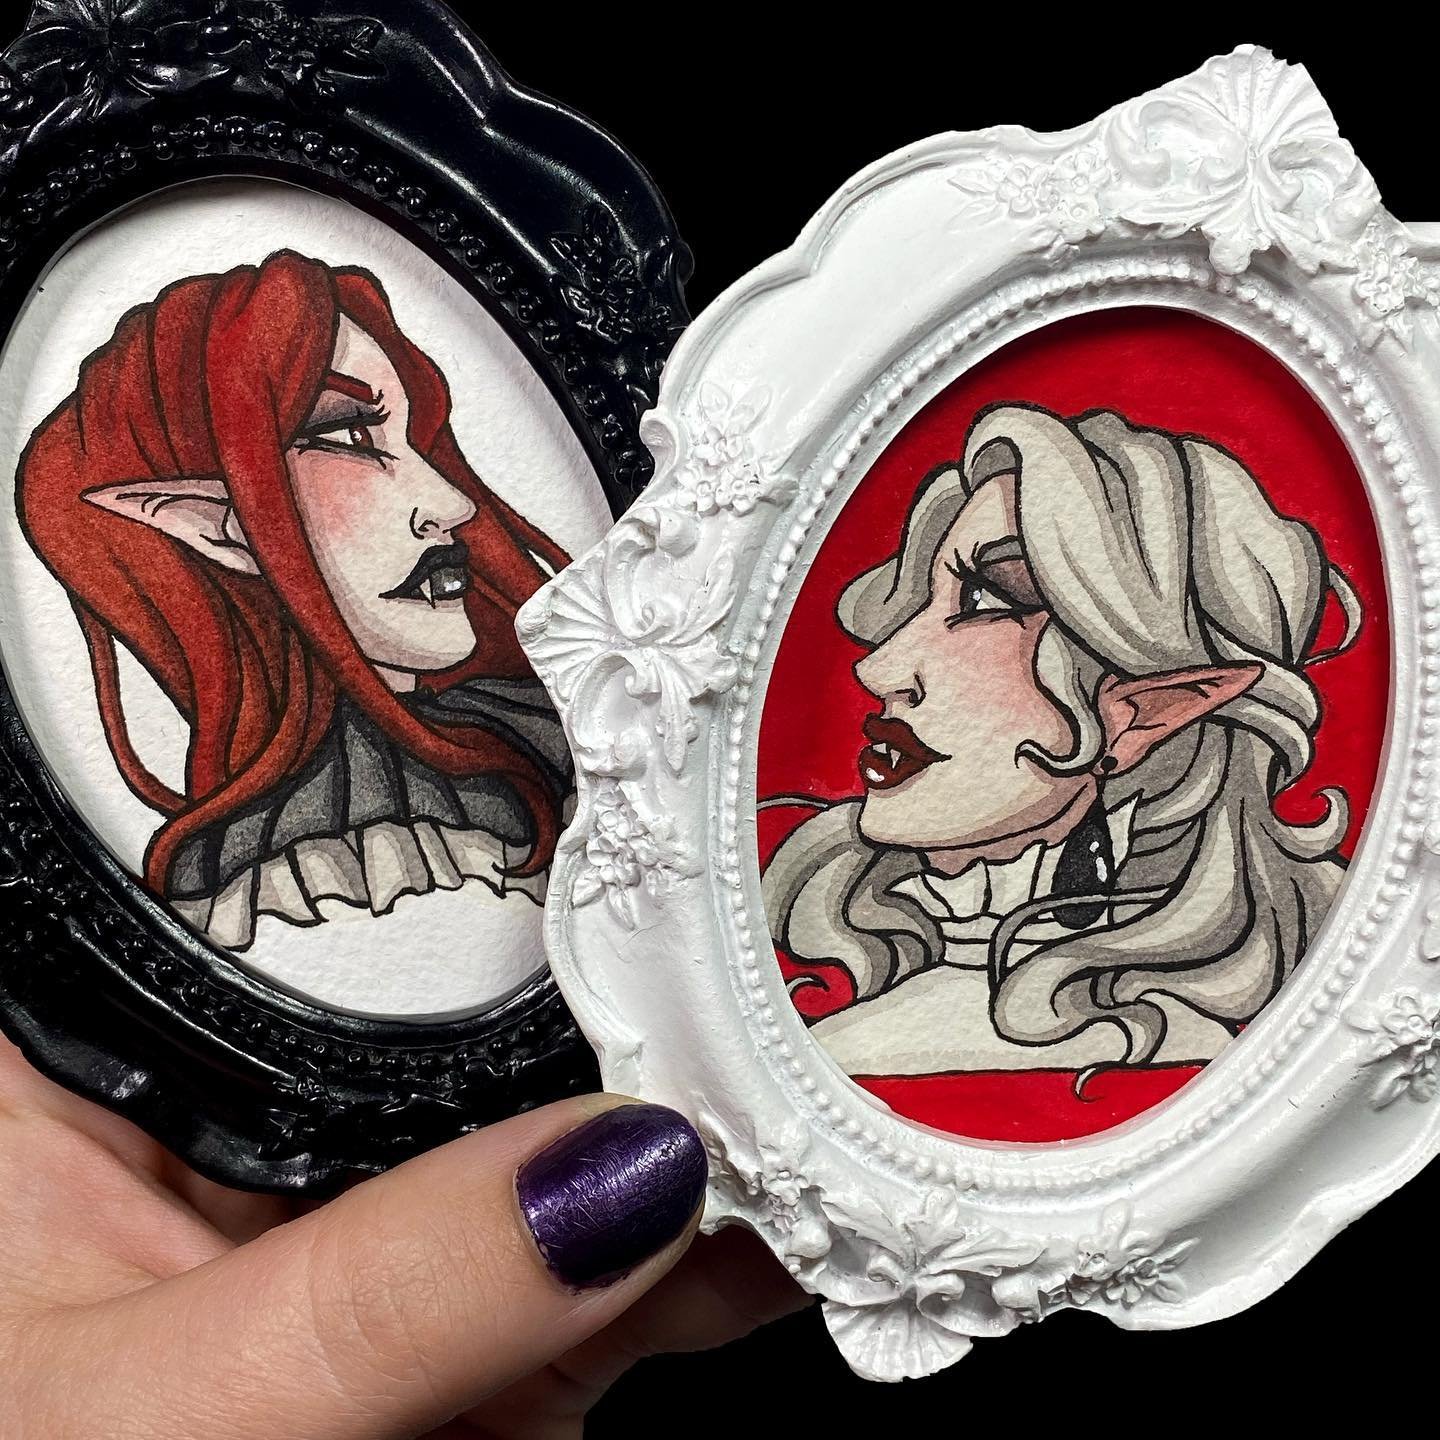 Mini Vampire paintings! 🩸

I based these illustrations on two tiny frames I&rsquo;ve had for awhile. The black and white contrasting colors were perfect for making opposing, yet similar, characters! 

I&rsquo;ll have these for sale at the @clarksvil